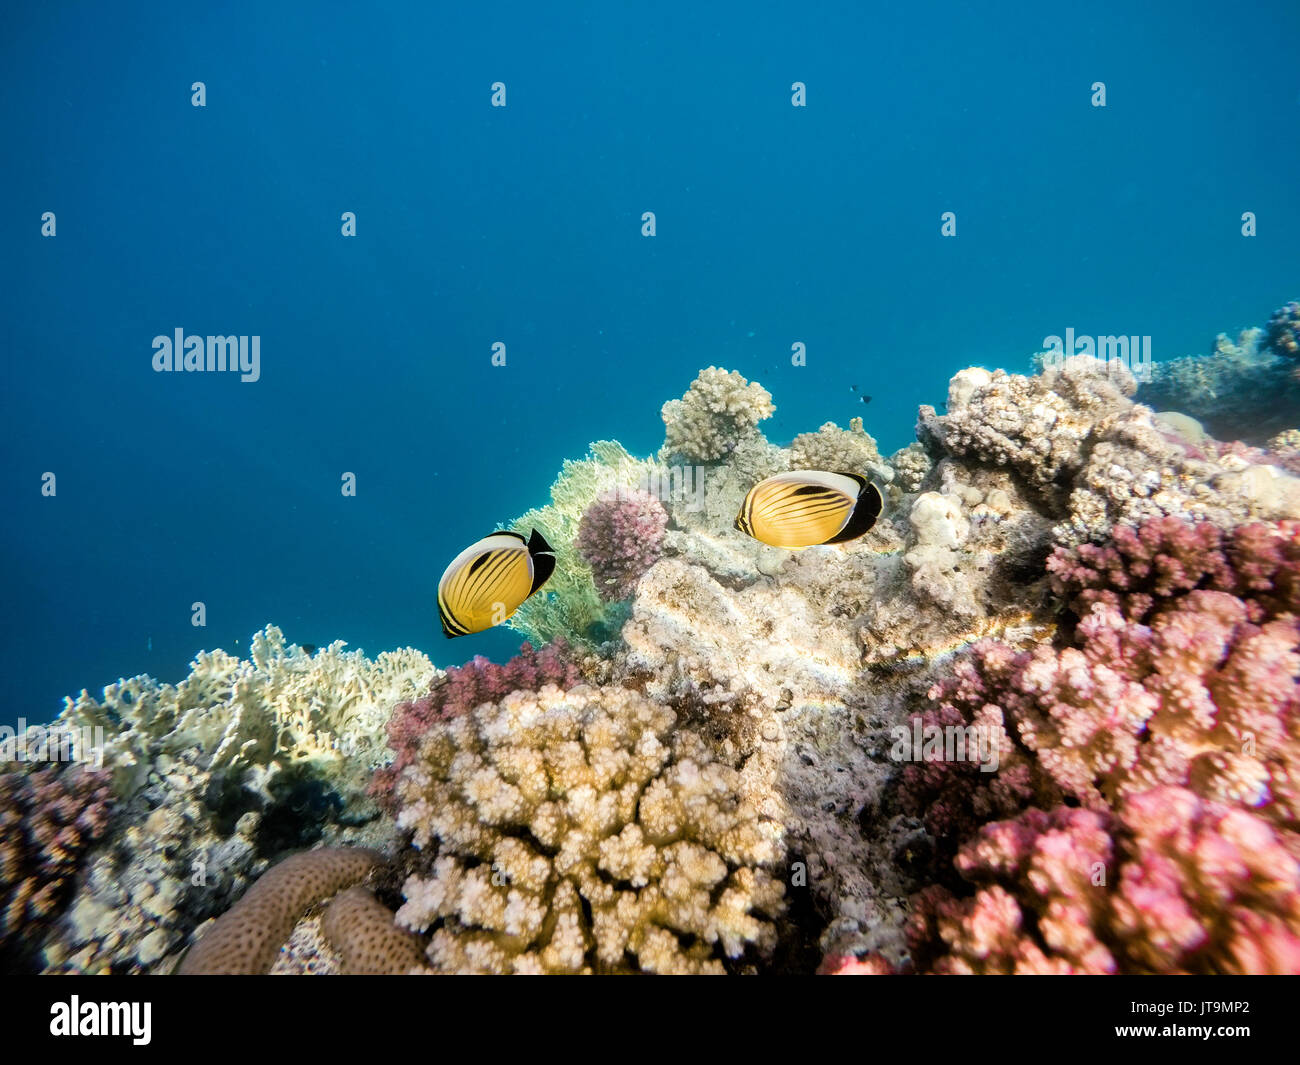 beautiful colorful coral garden with Blacktail butterflyfish in red sea, Marsa Alam, Egypt Stock Photo